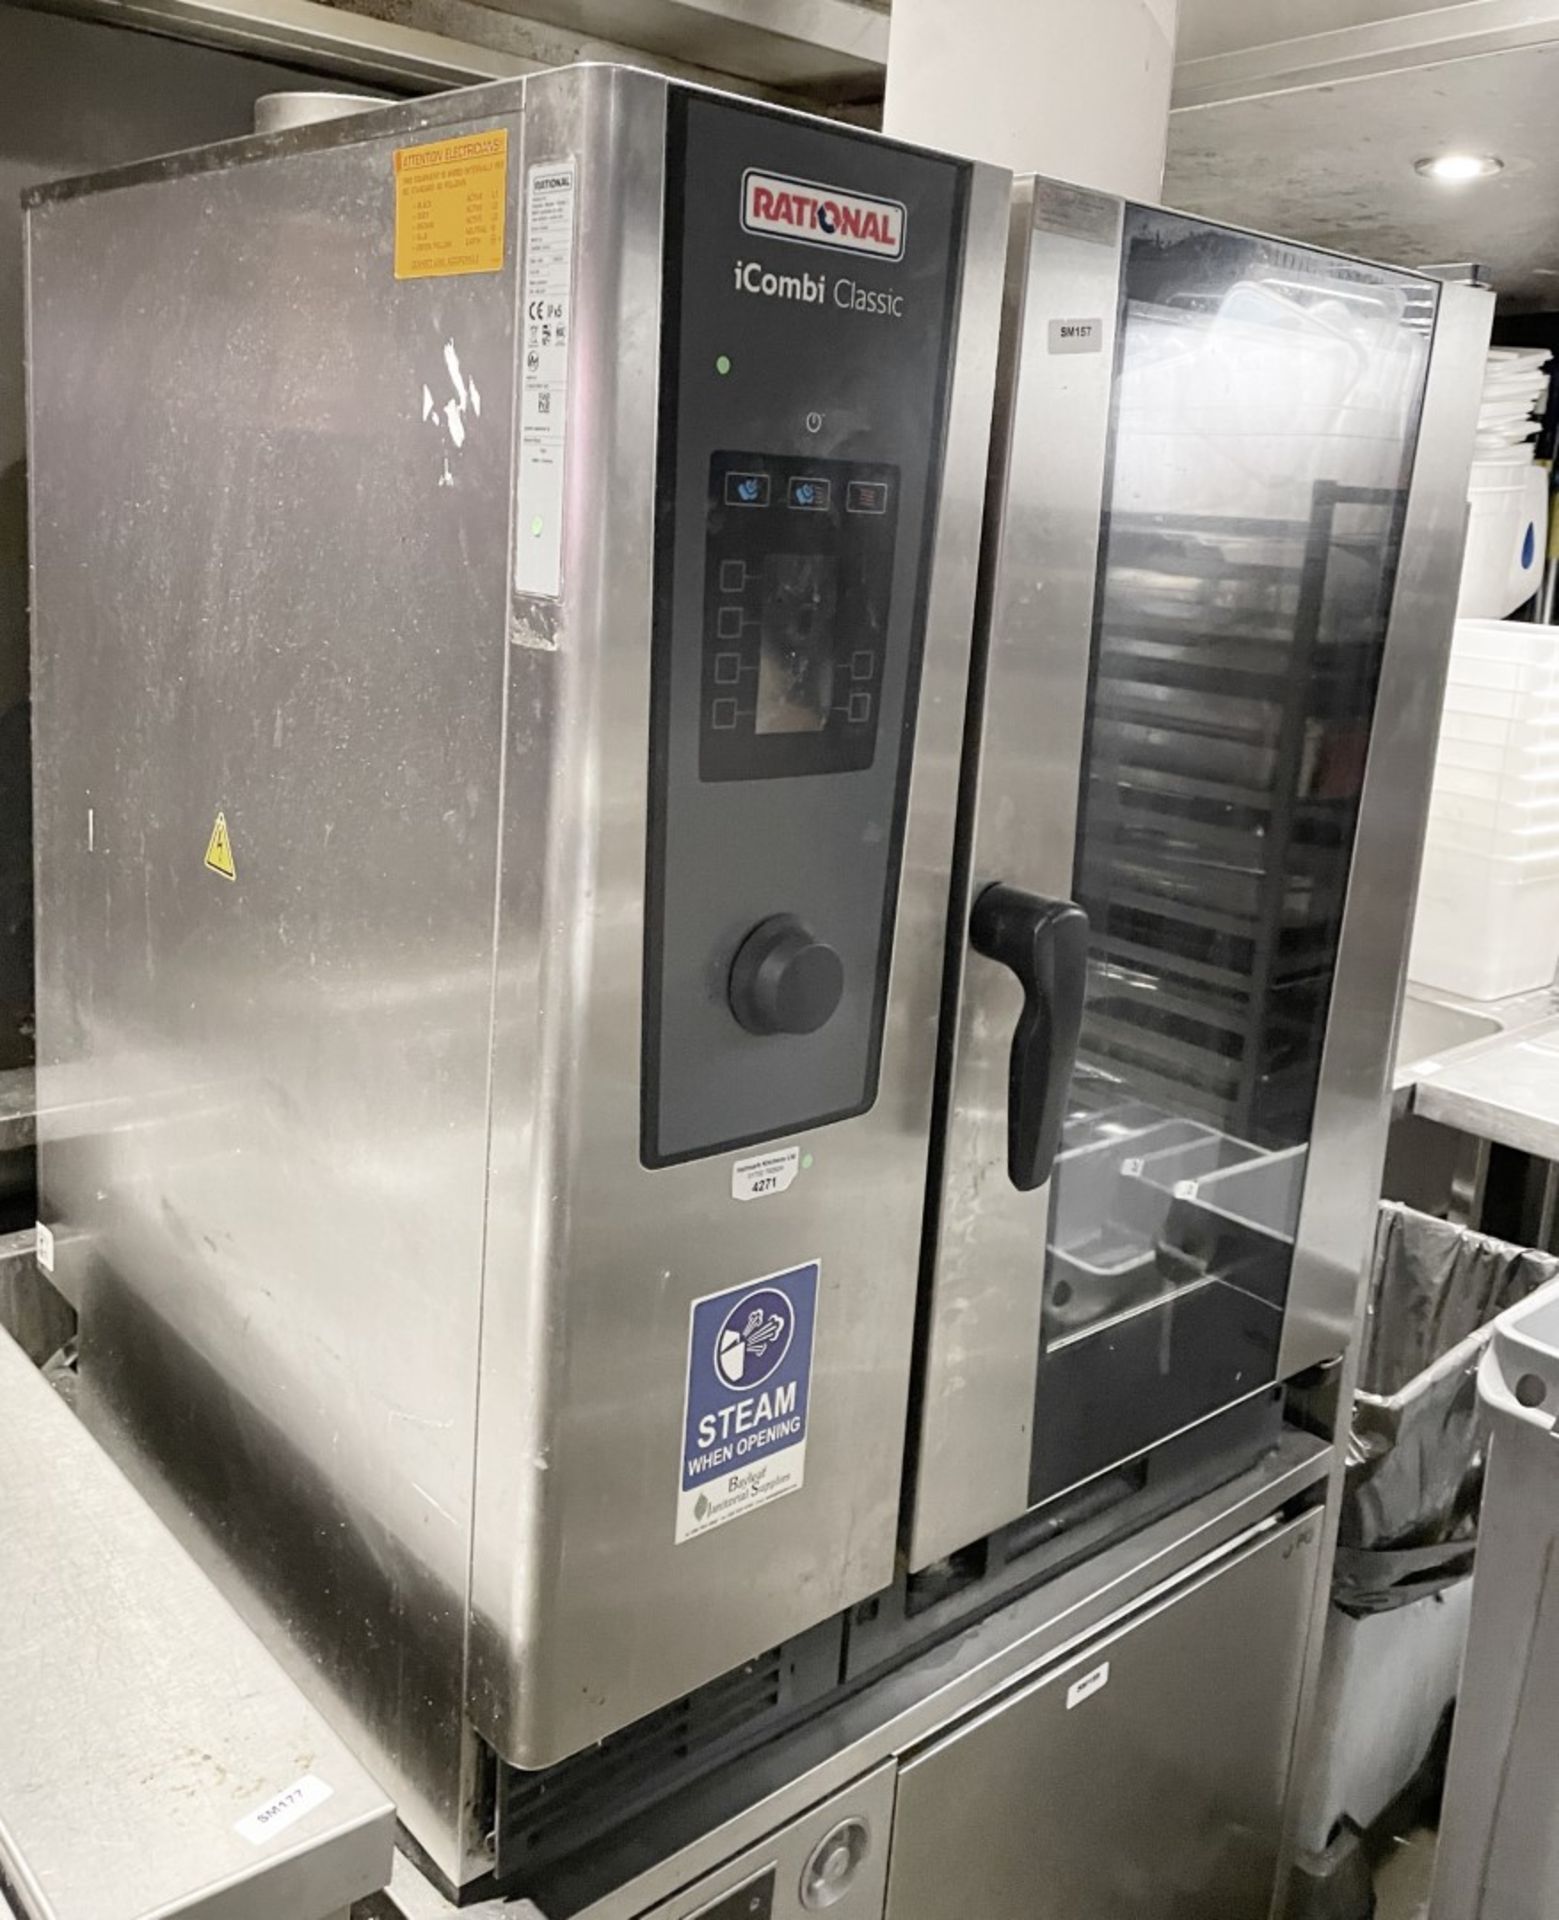 1 x Rational iCombi Classic Electric 3 Phase 10 Grid Combi Oven - Year: 2021 - Model: LM200DE - Image 5 of 18